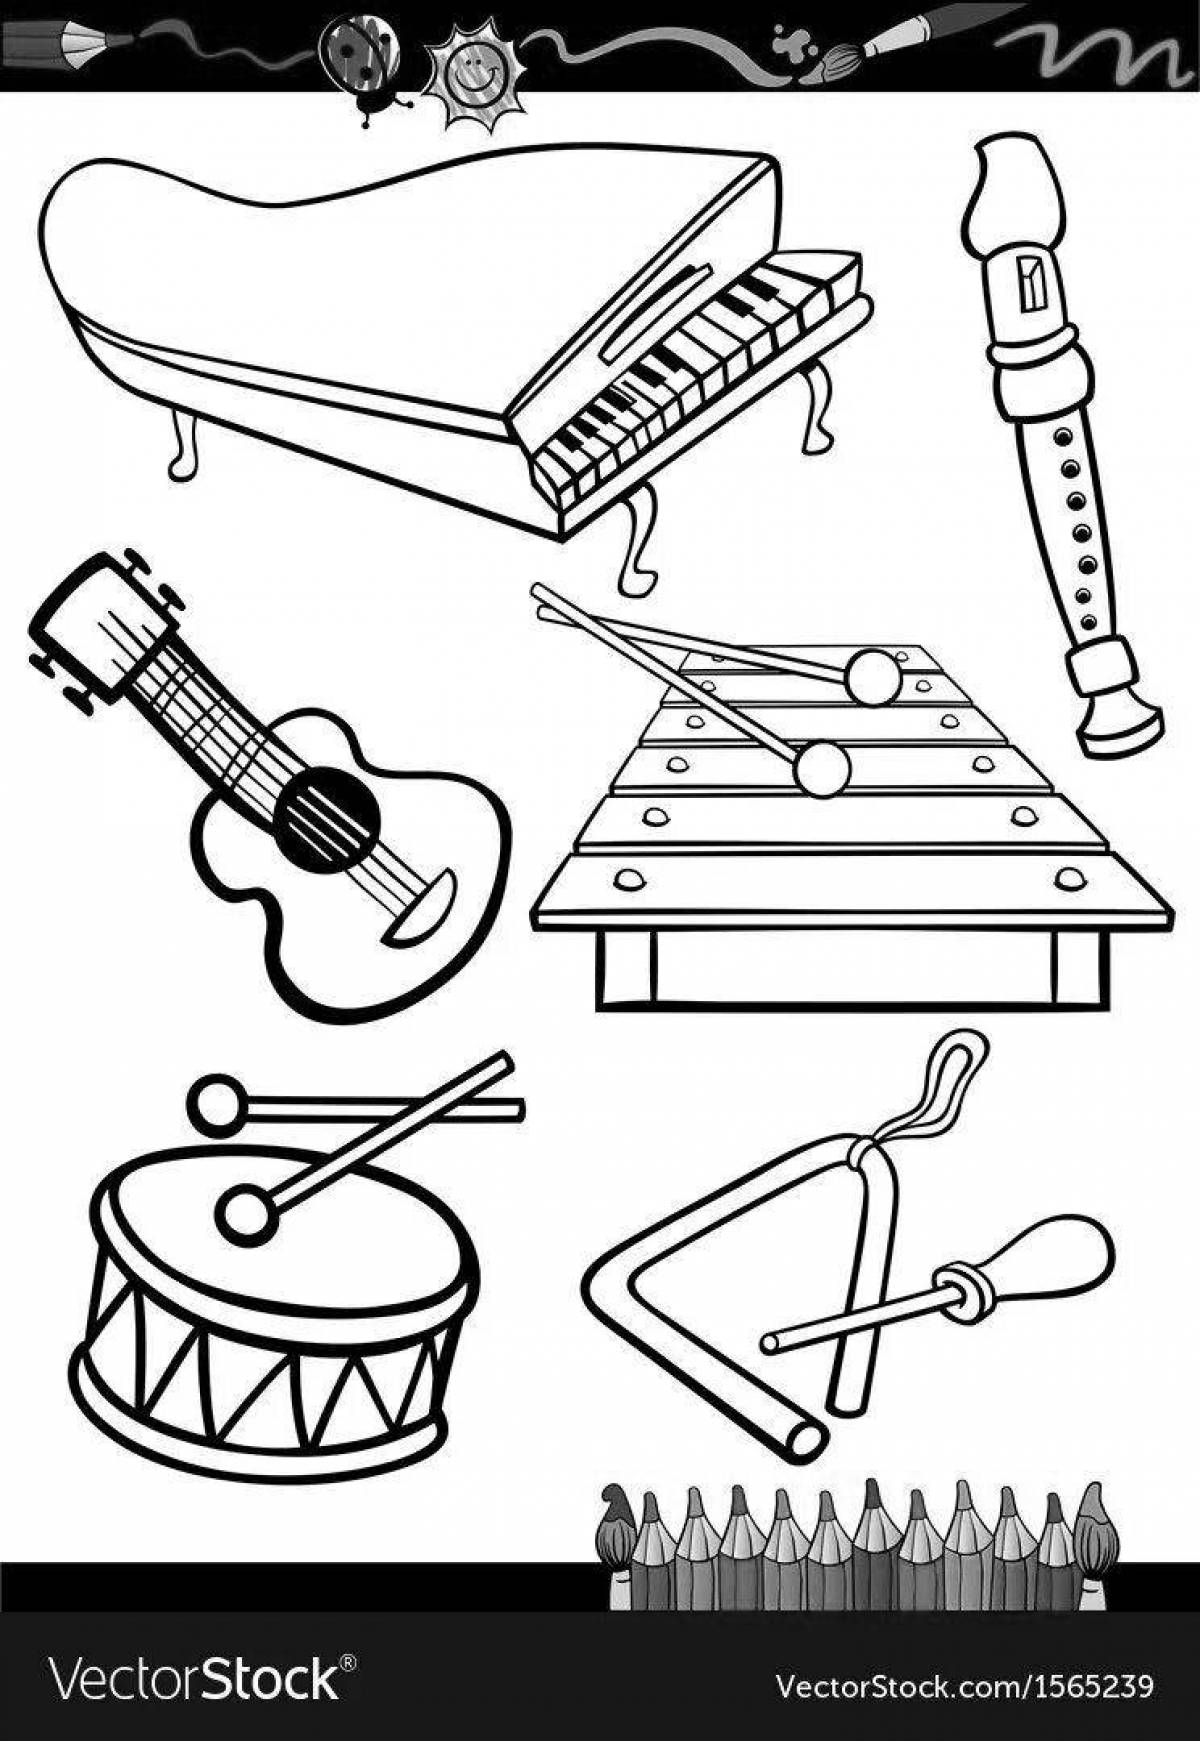 Coloring Russian folk instruments for children